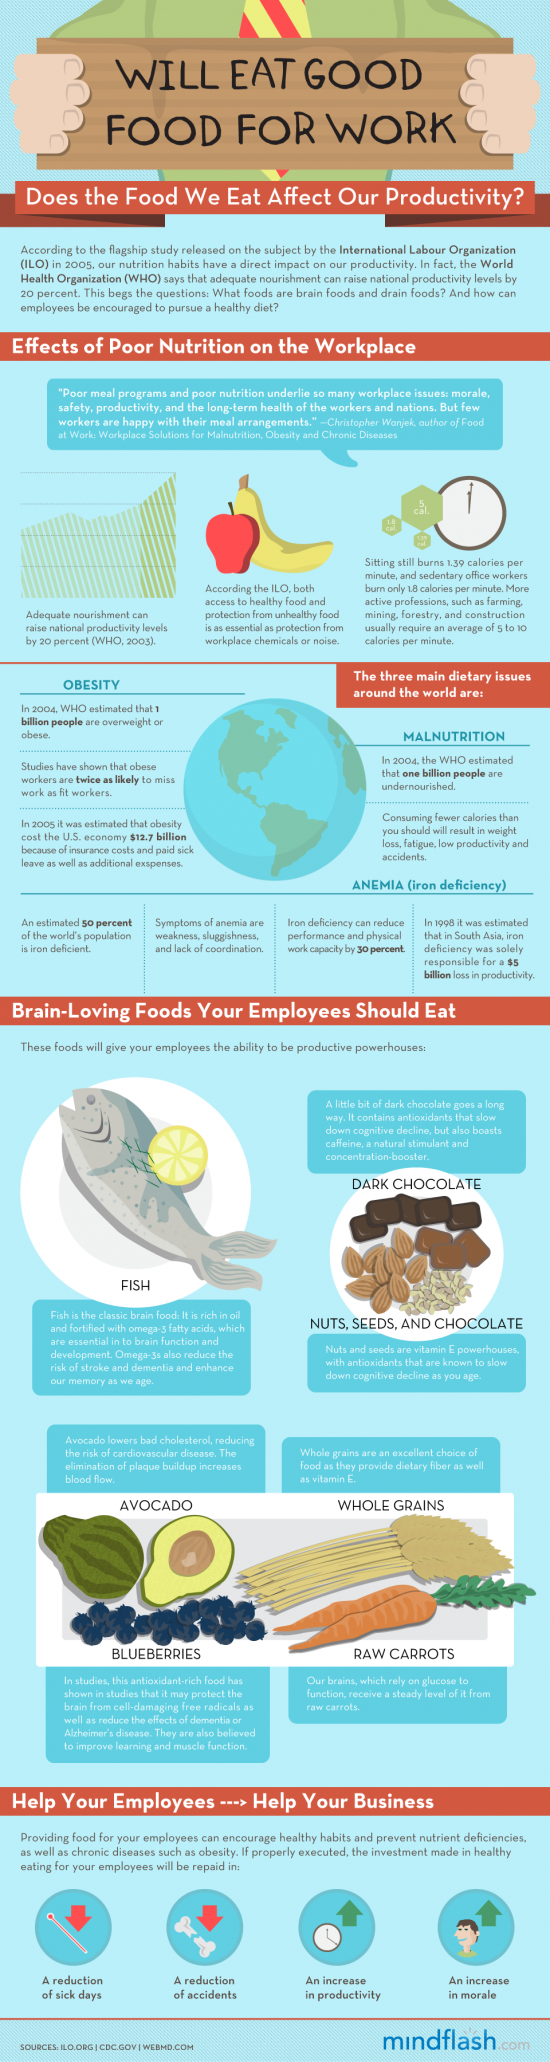 InfoGraphic on Good Food for Work,